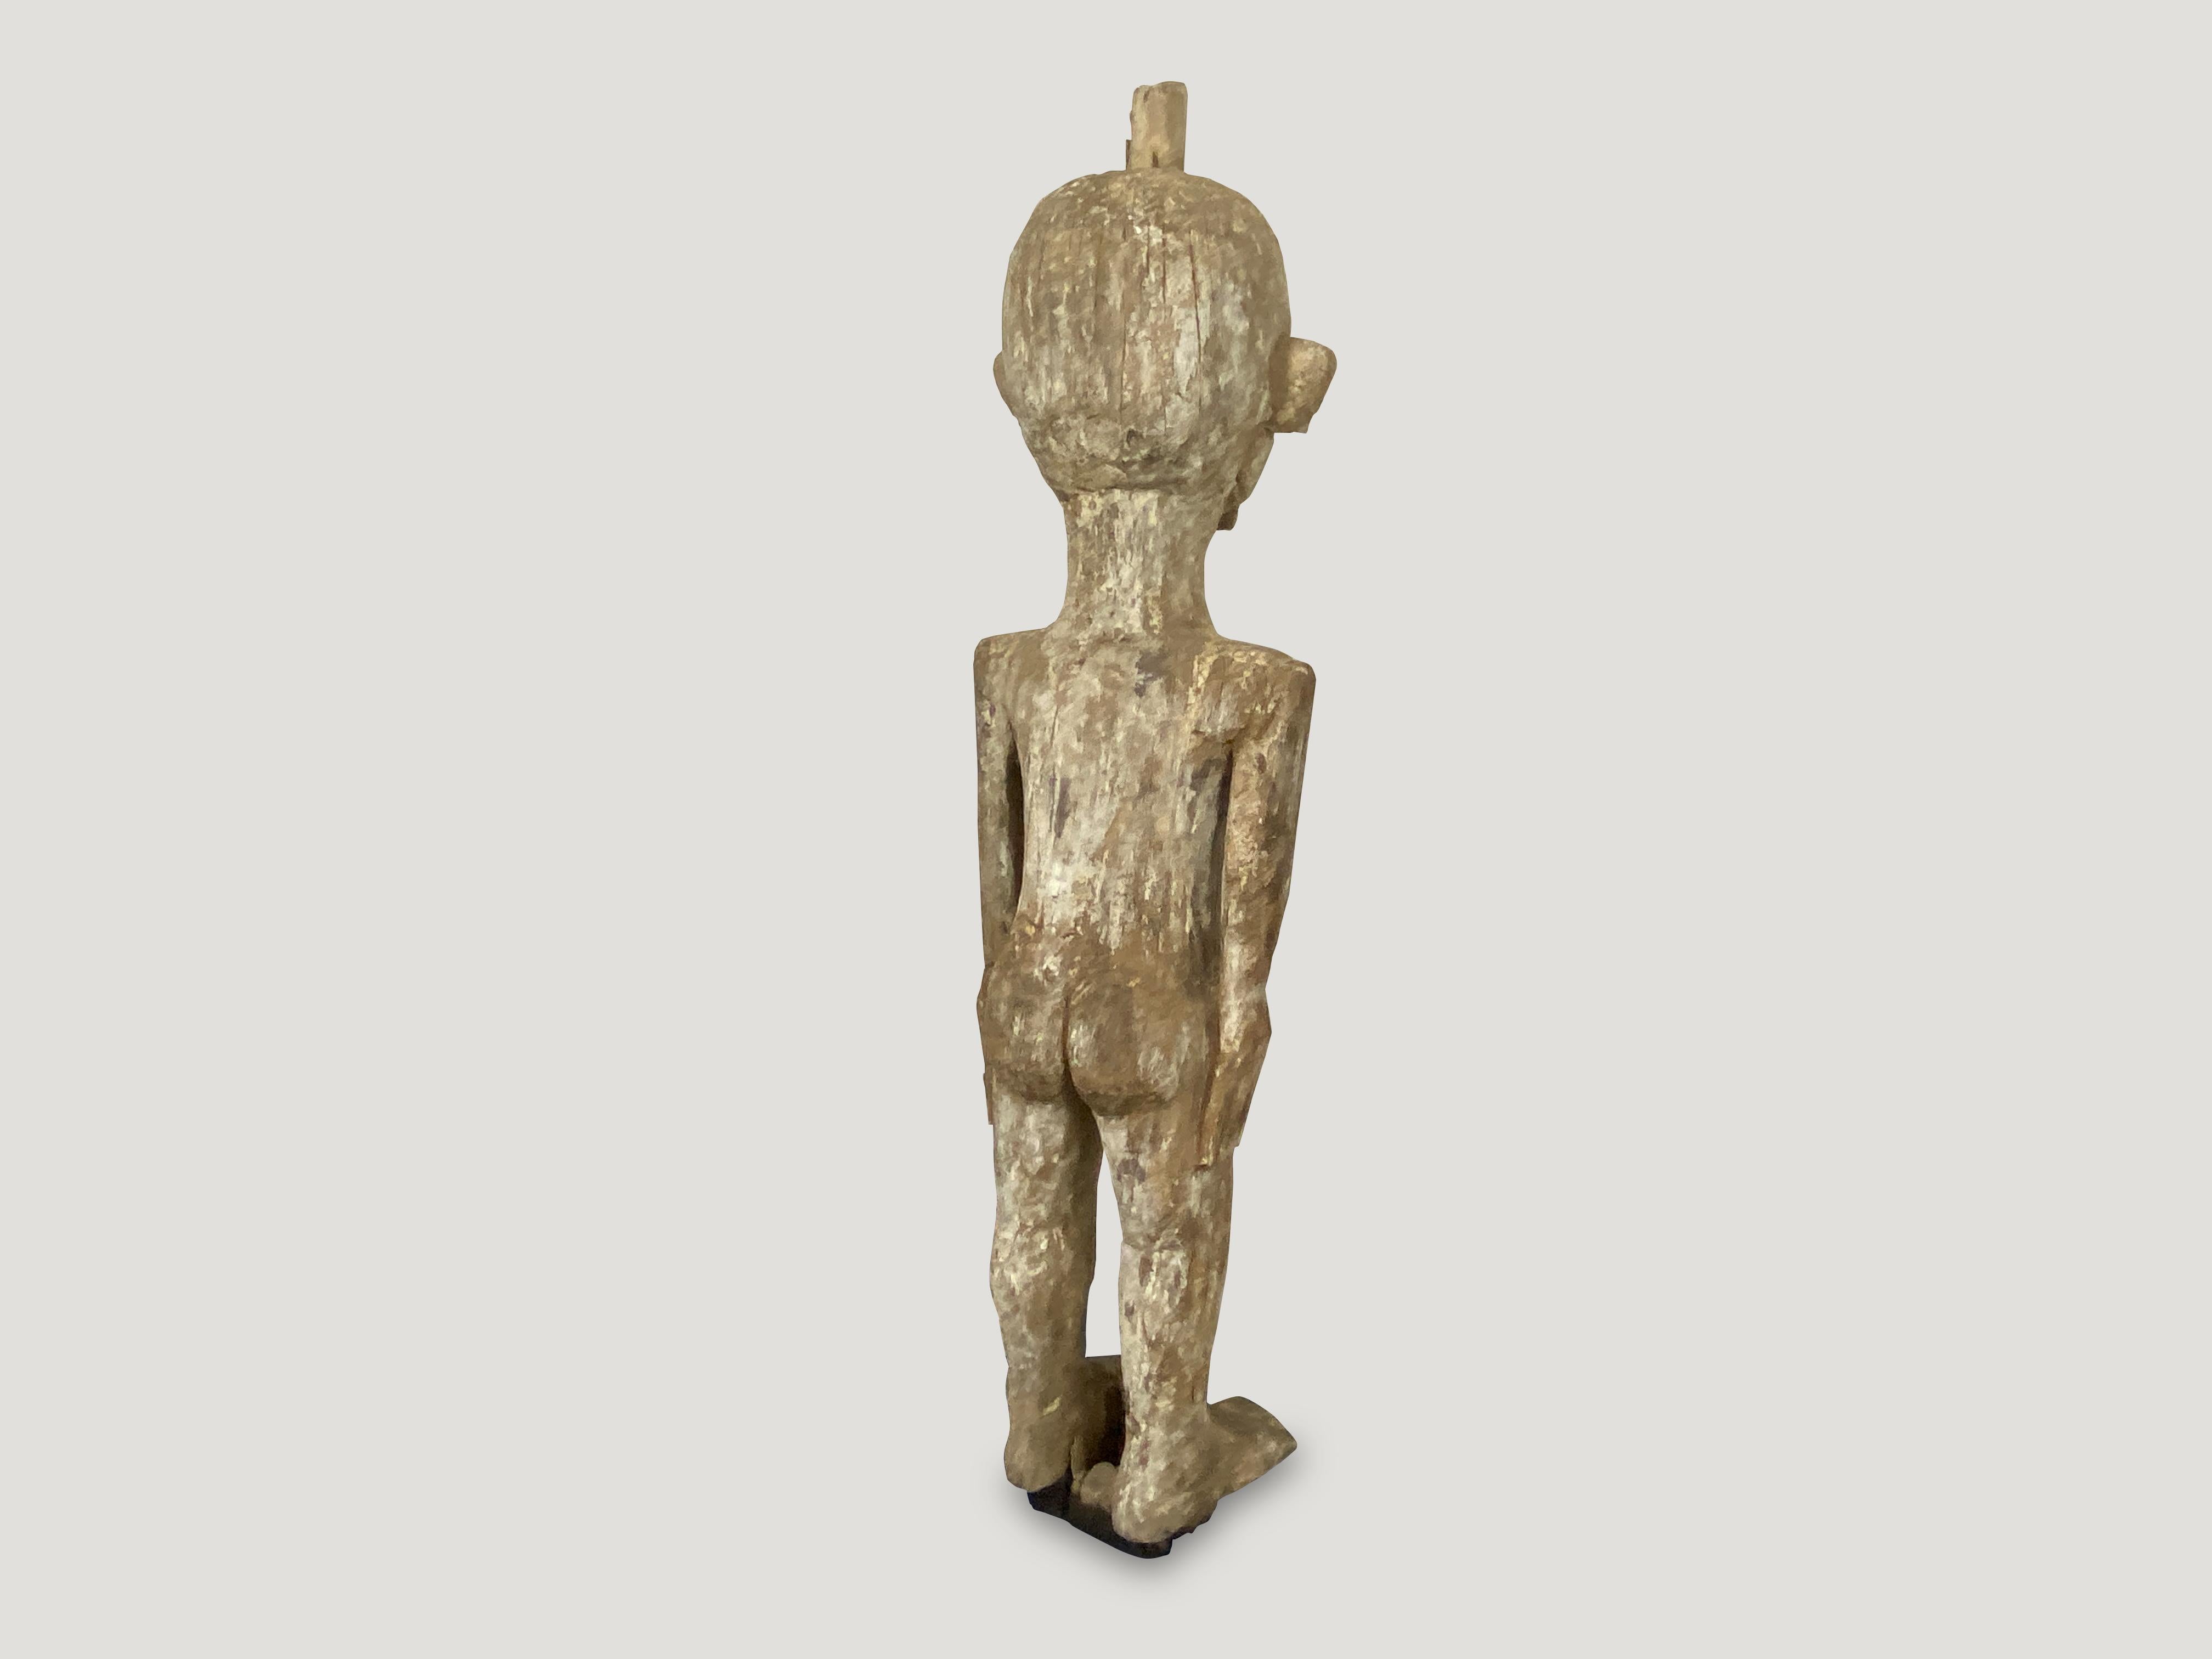 Antique hand carved statue of a primitive man from Sumatra. Originally used to protect the home. The wooden block under the feet were placed in the earth.

This statue was sourced in the spirit of wabi-sabi, a Japanese philosophy that beauty can